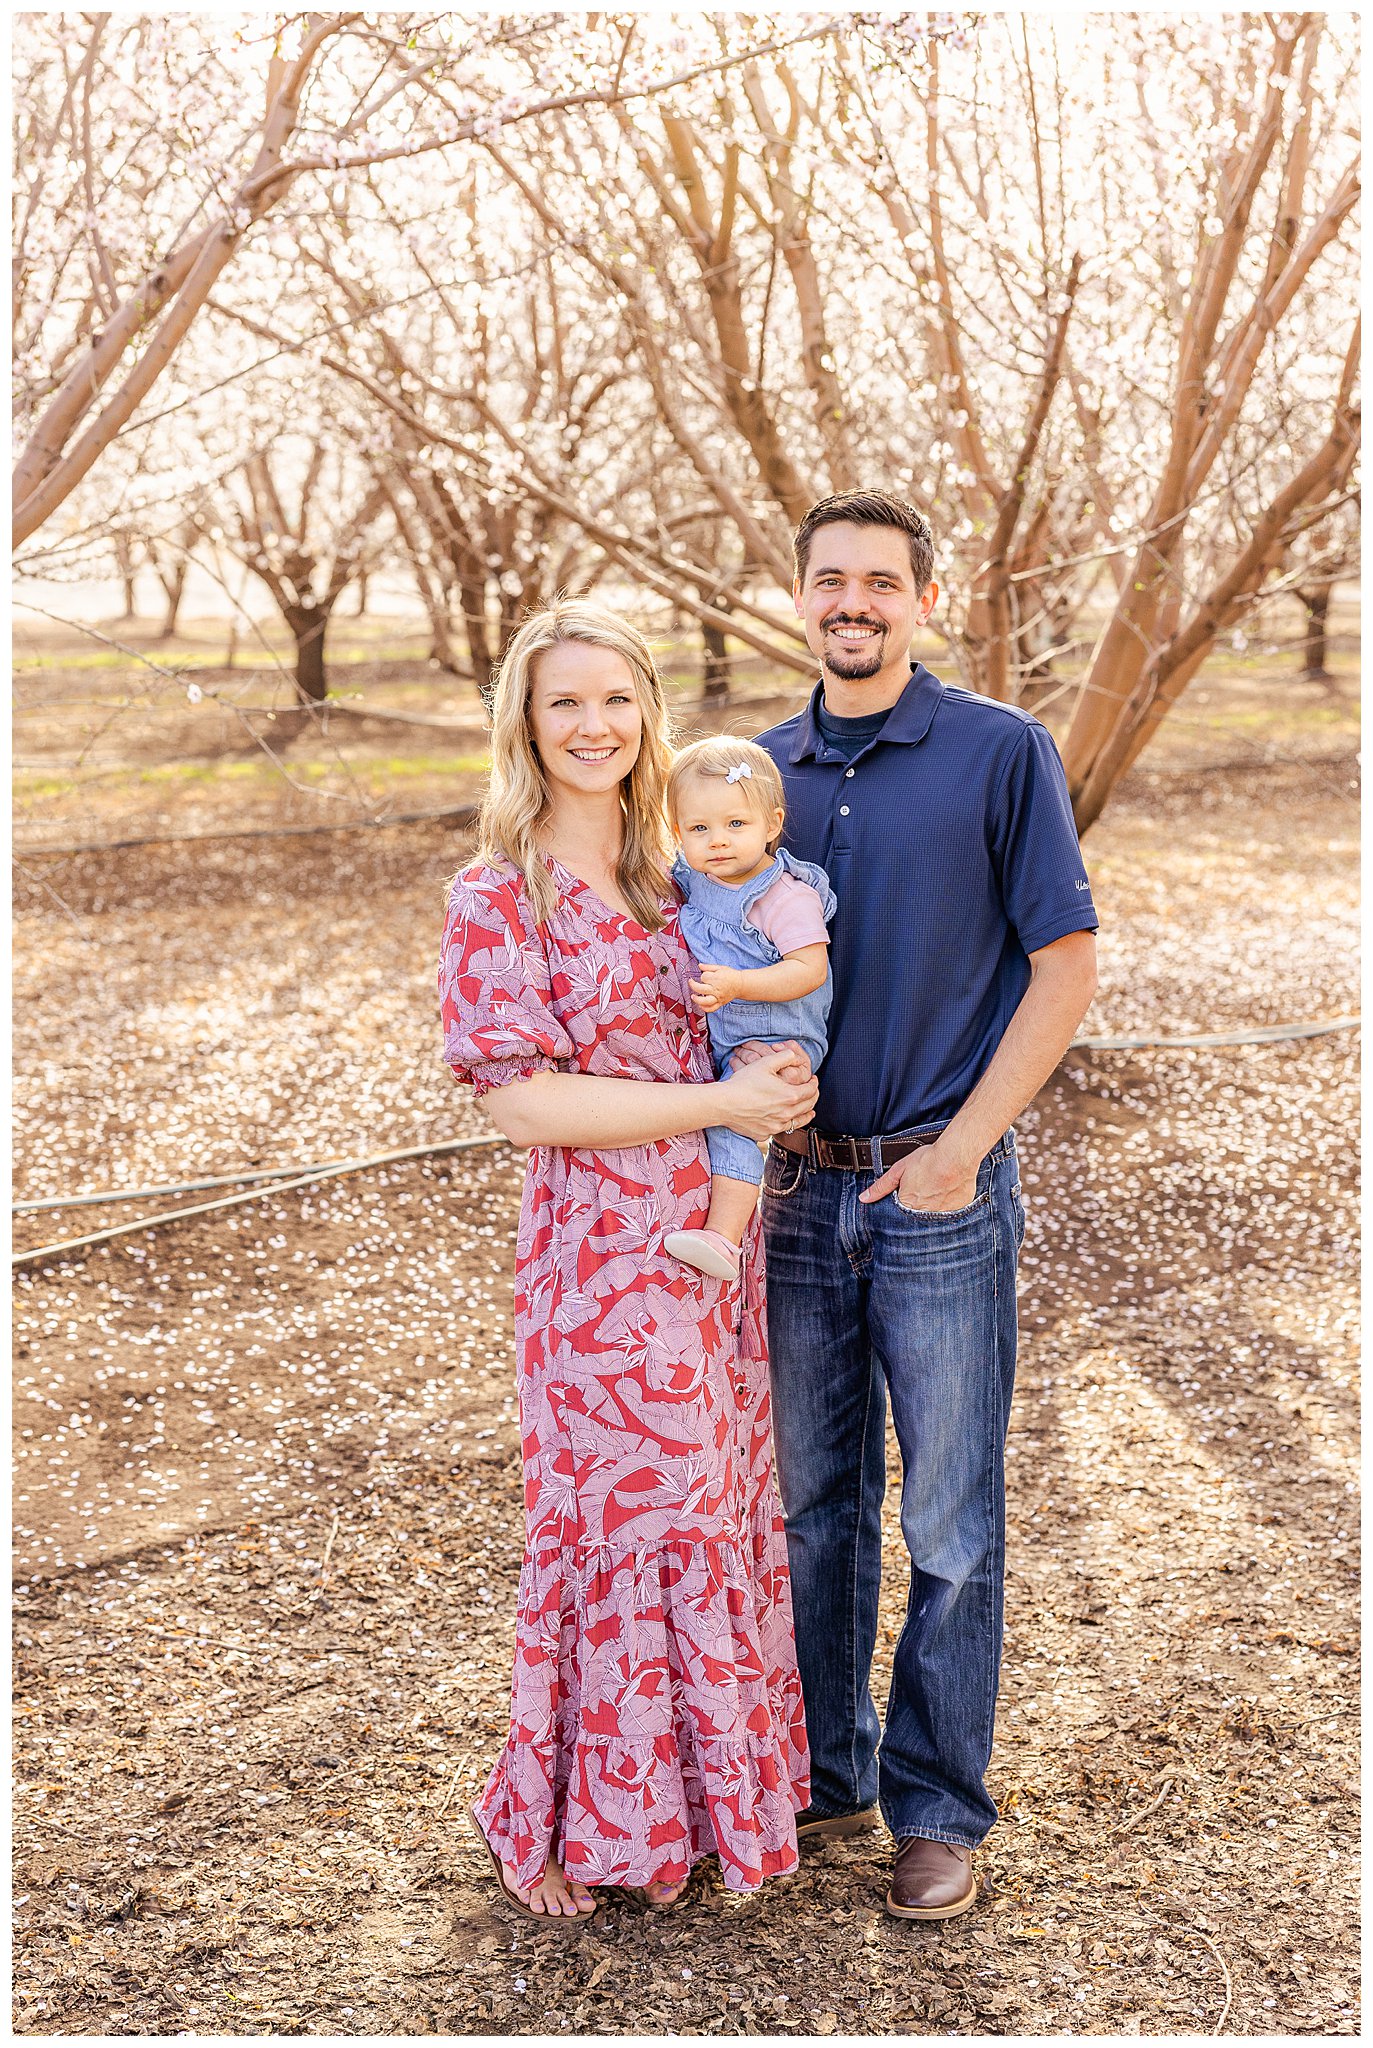 Almond Blossom Mini Sessions with Family in Orchard | Almond Blossom Mini Sessions